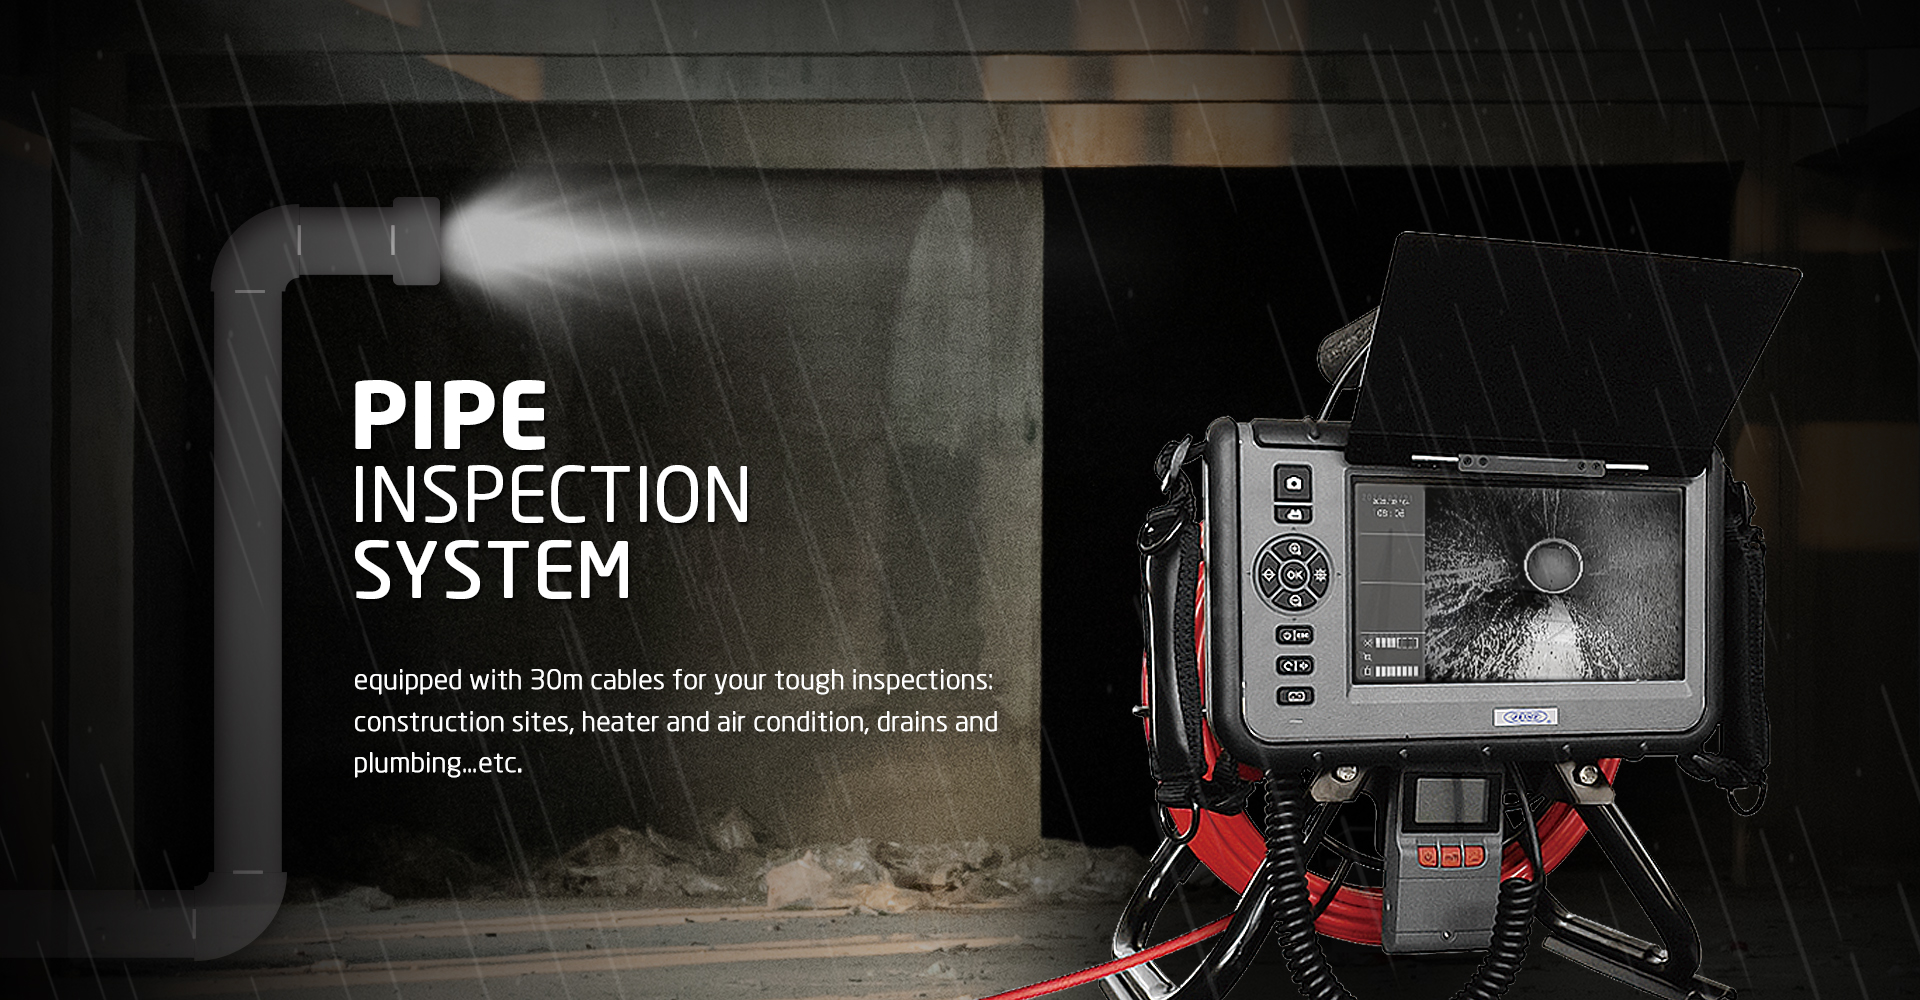 Pipe-sewer-inspection-camera-probe-console-system-j-series